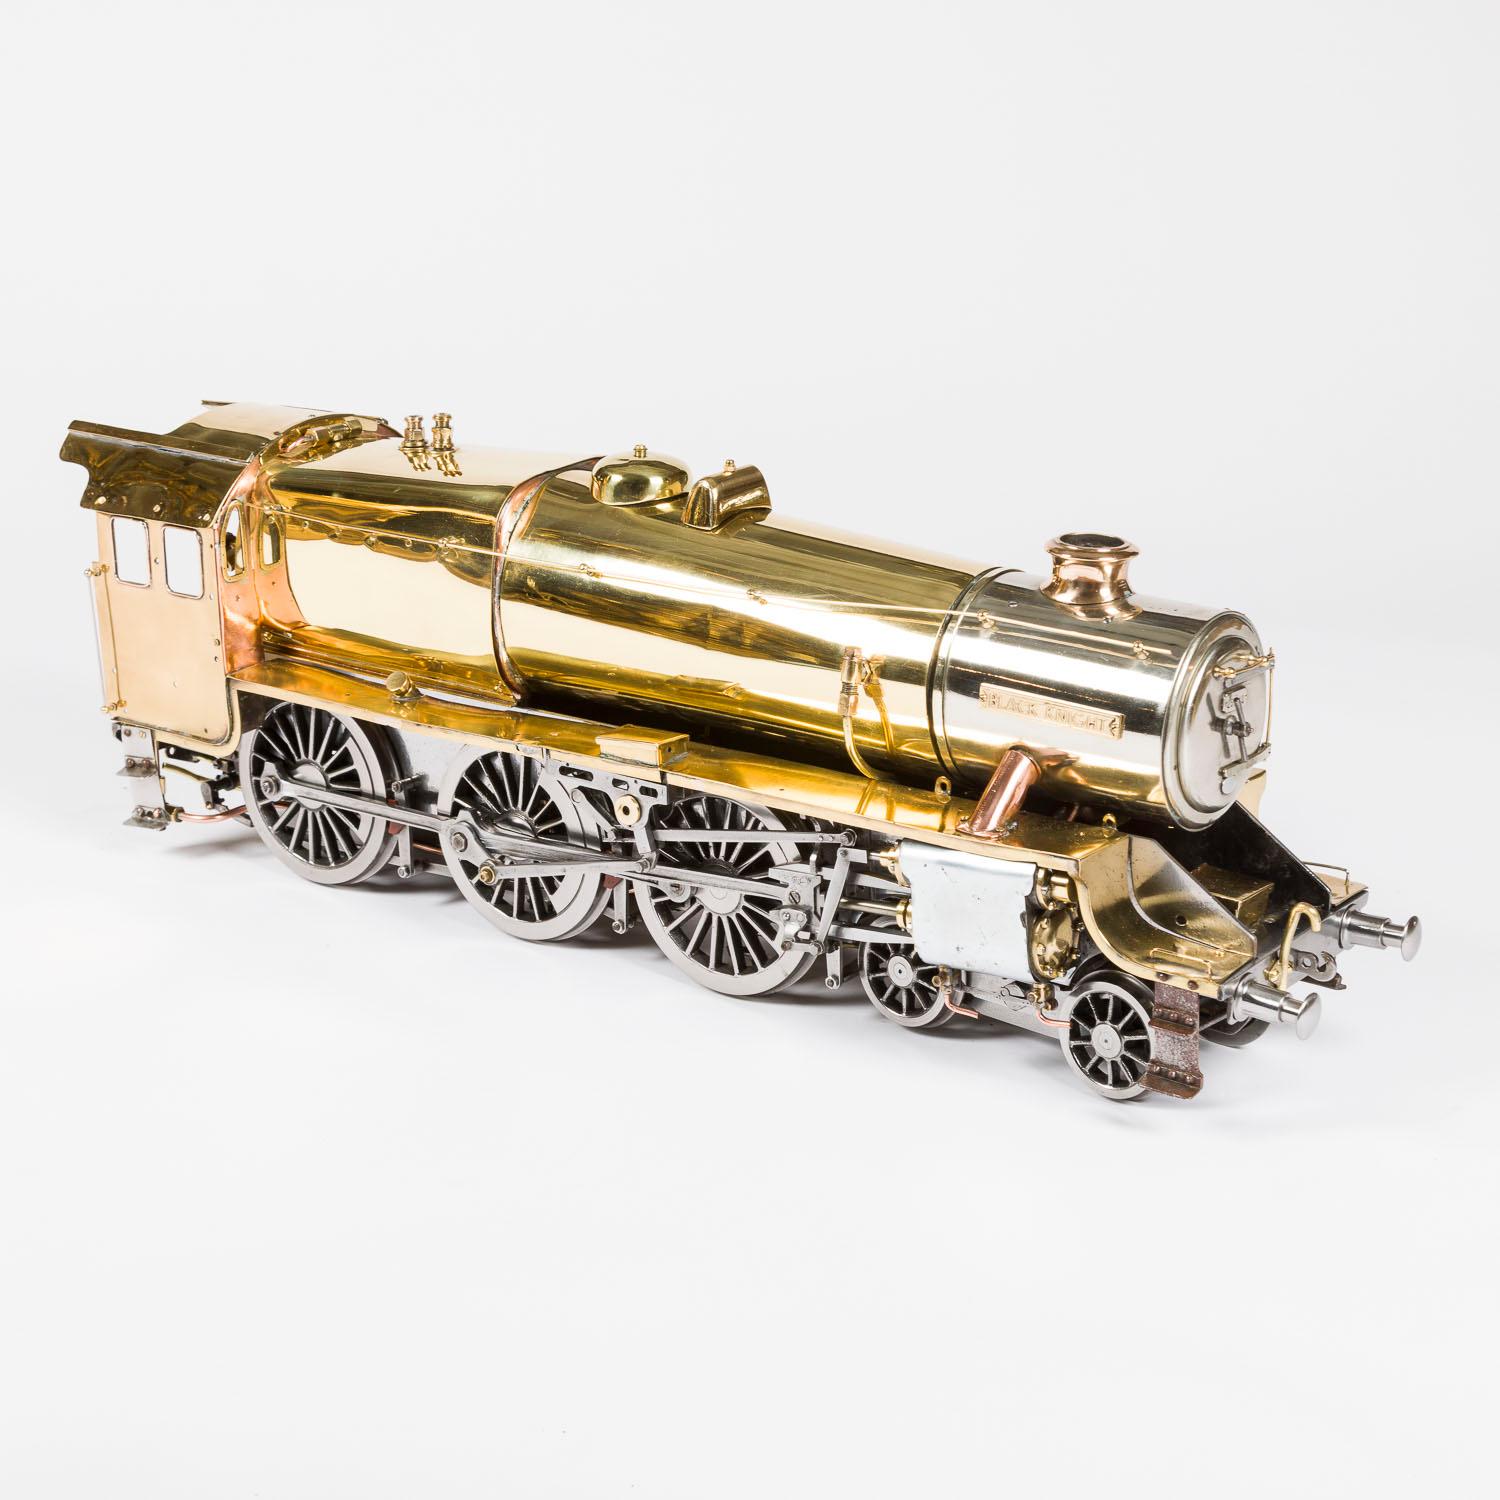 Brass Model of the 4-6-0 steam locomotive the Black Knight For Sale